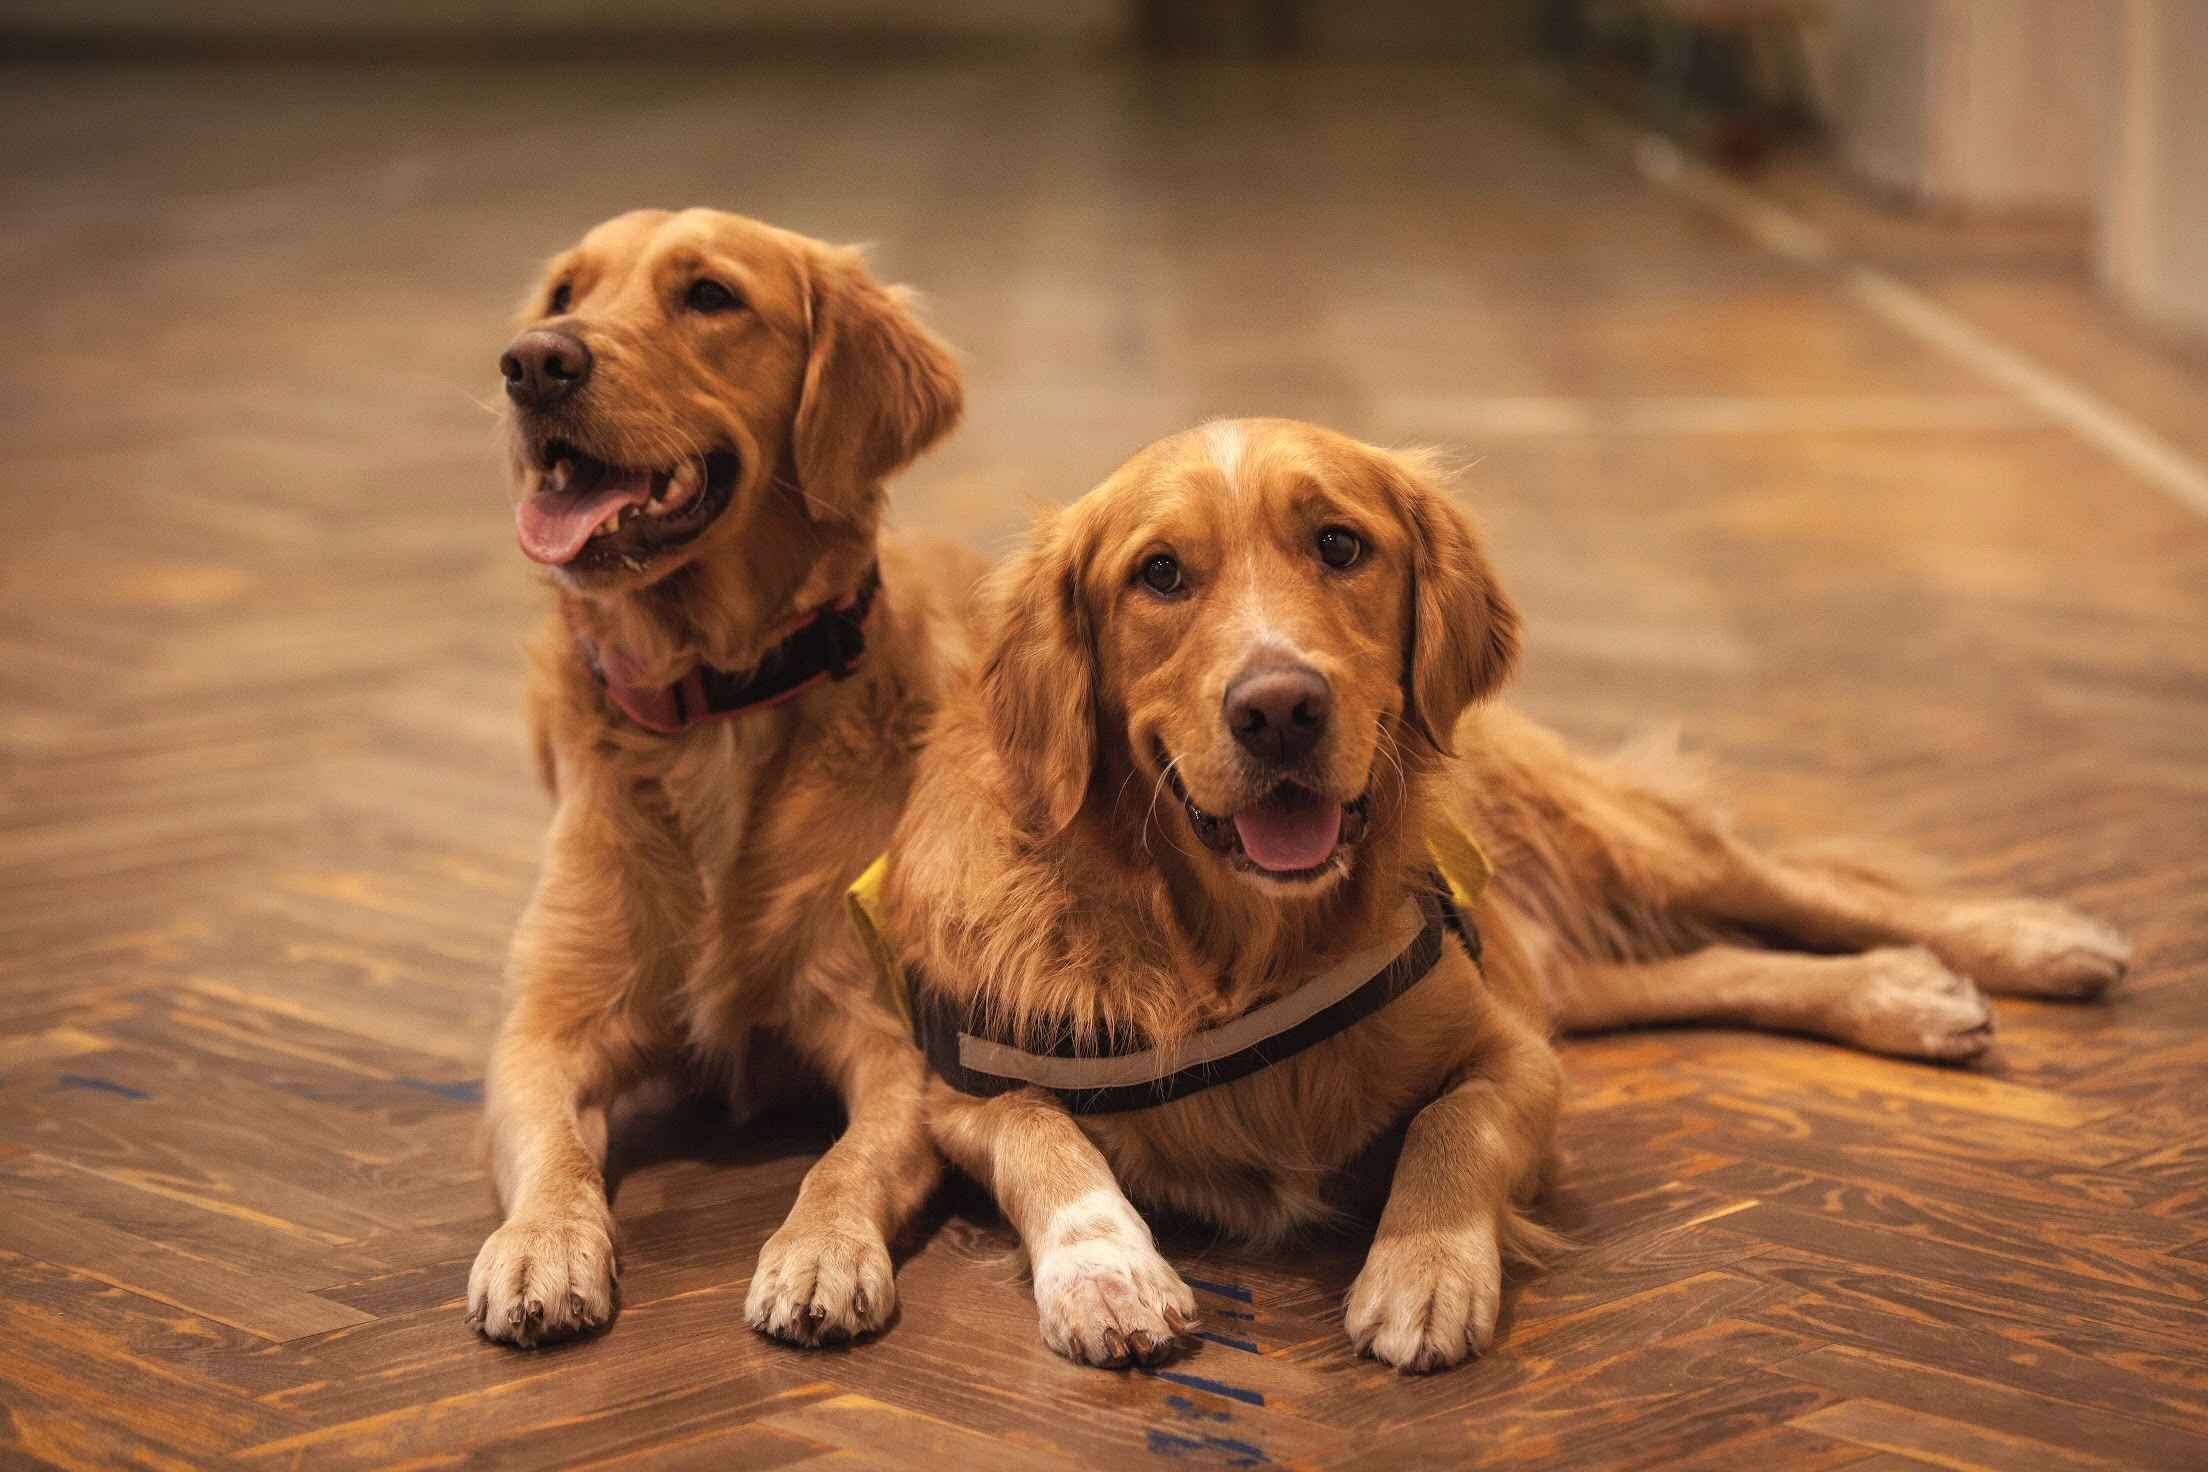 What are some common behavioral issues that Golden Retrievers may exhibit?